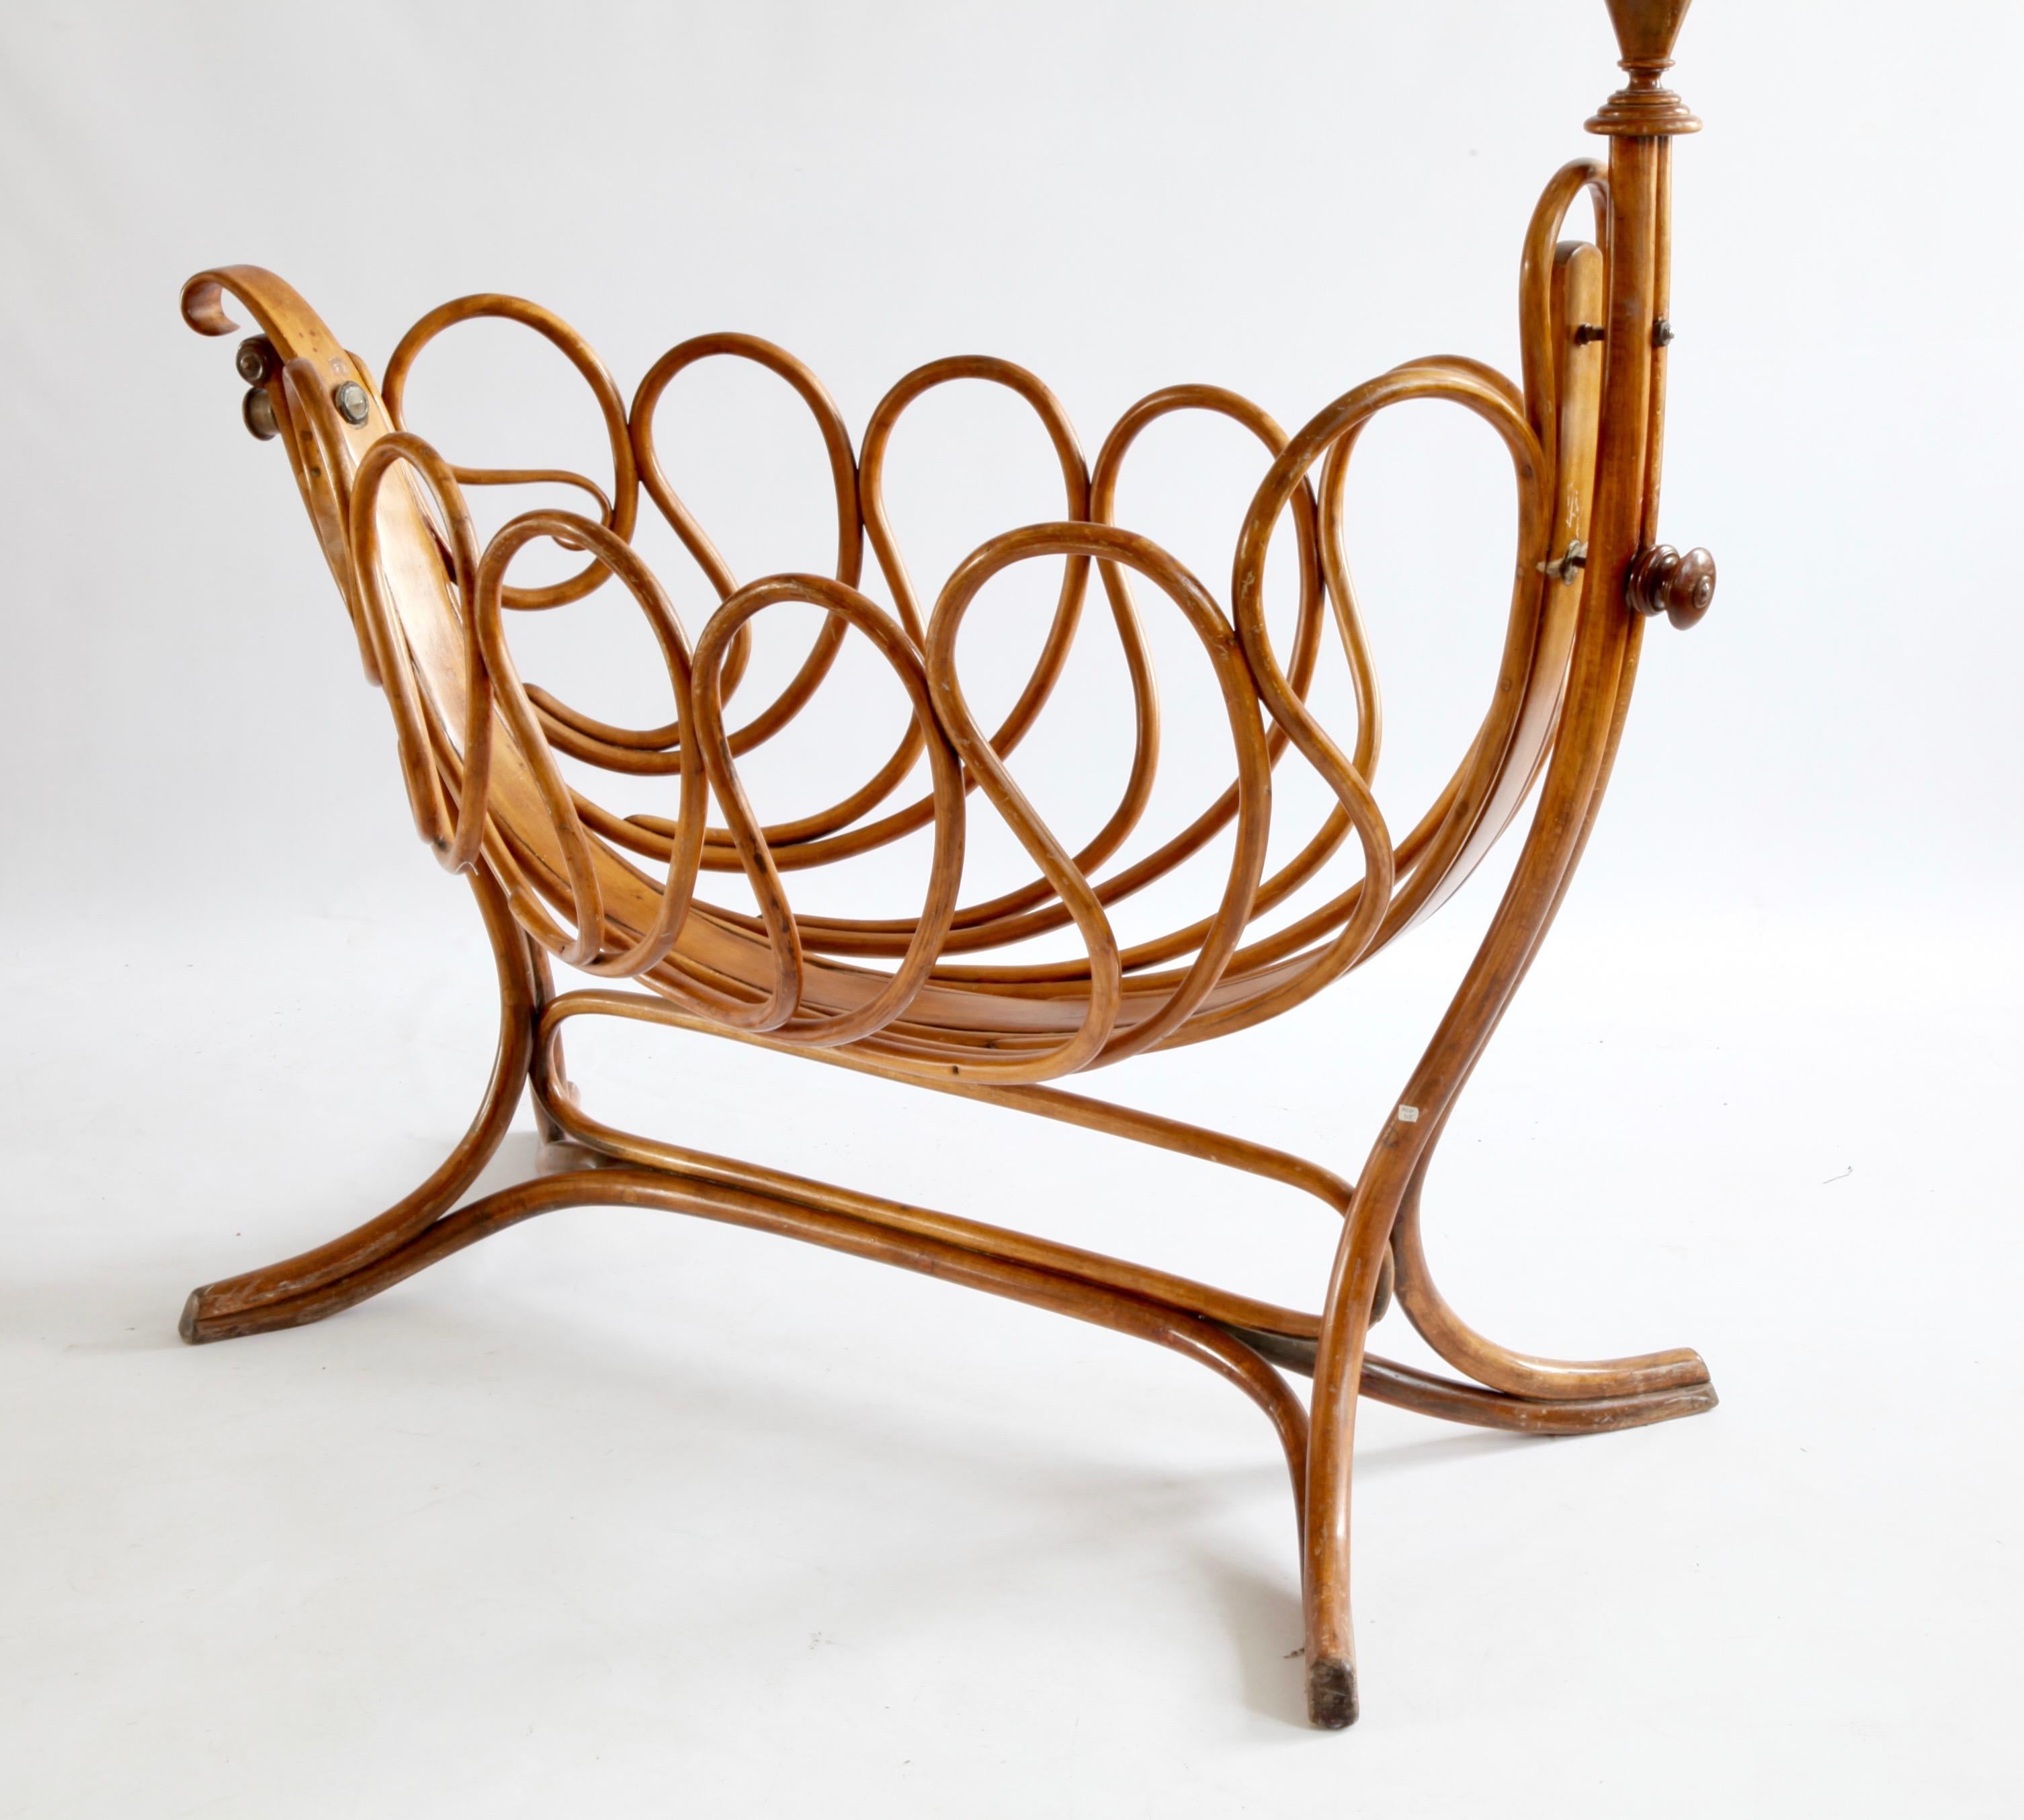 Rare French Bentwood Cradle in the Thonet Style, Late 19th Century For Sale 1